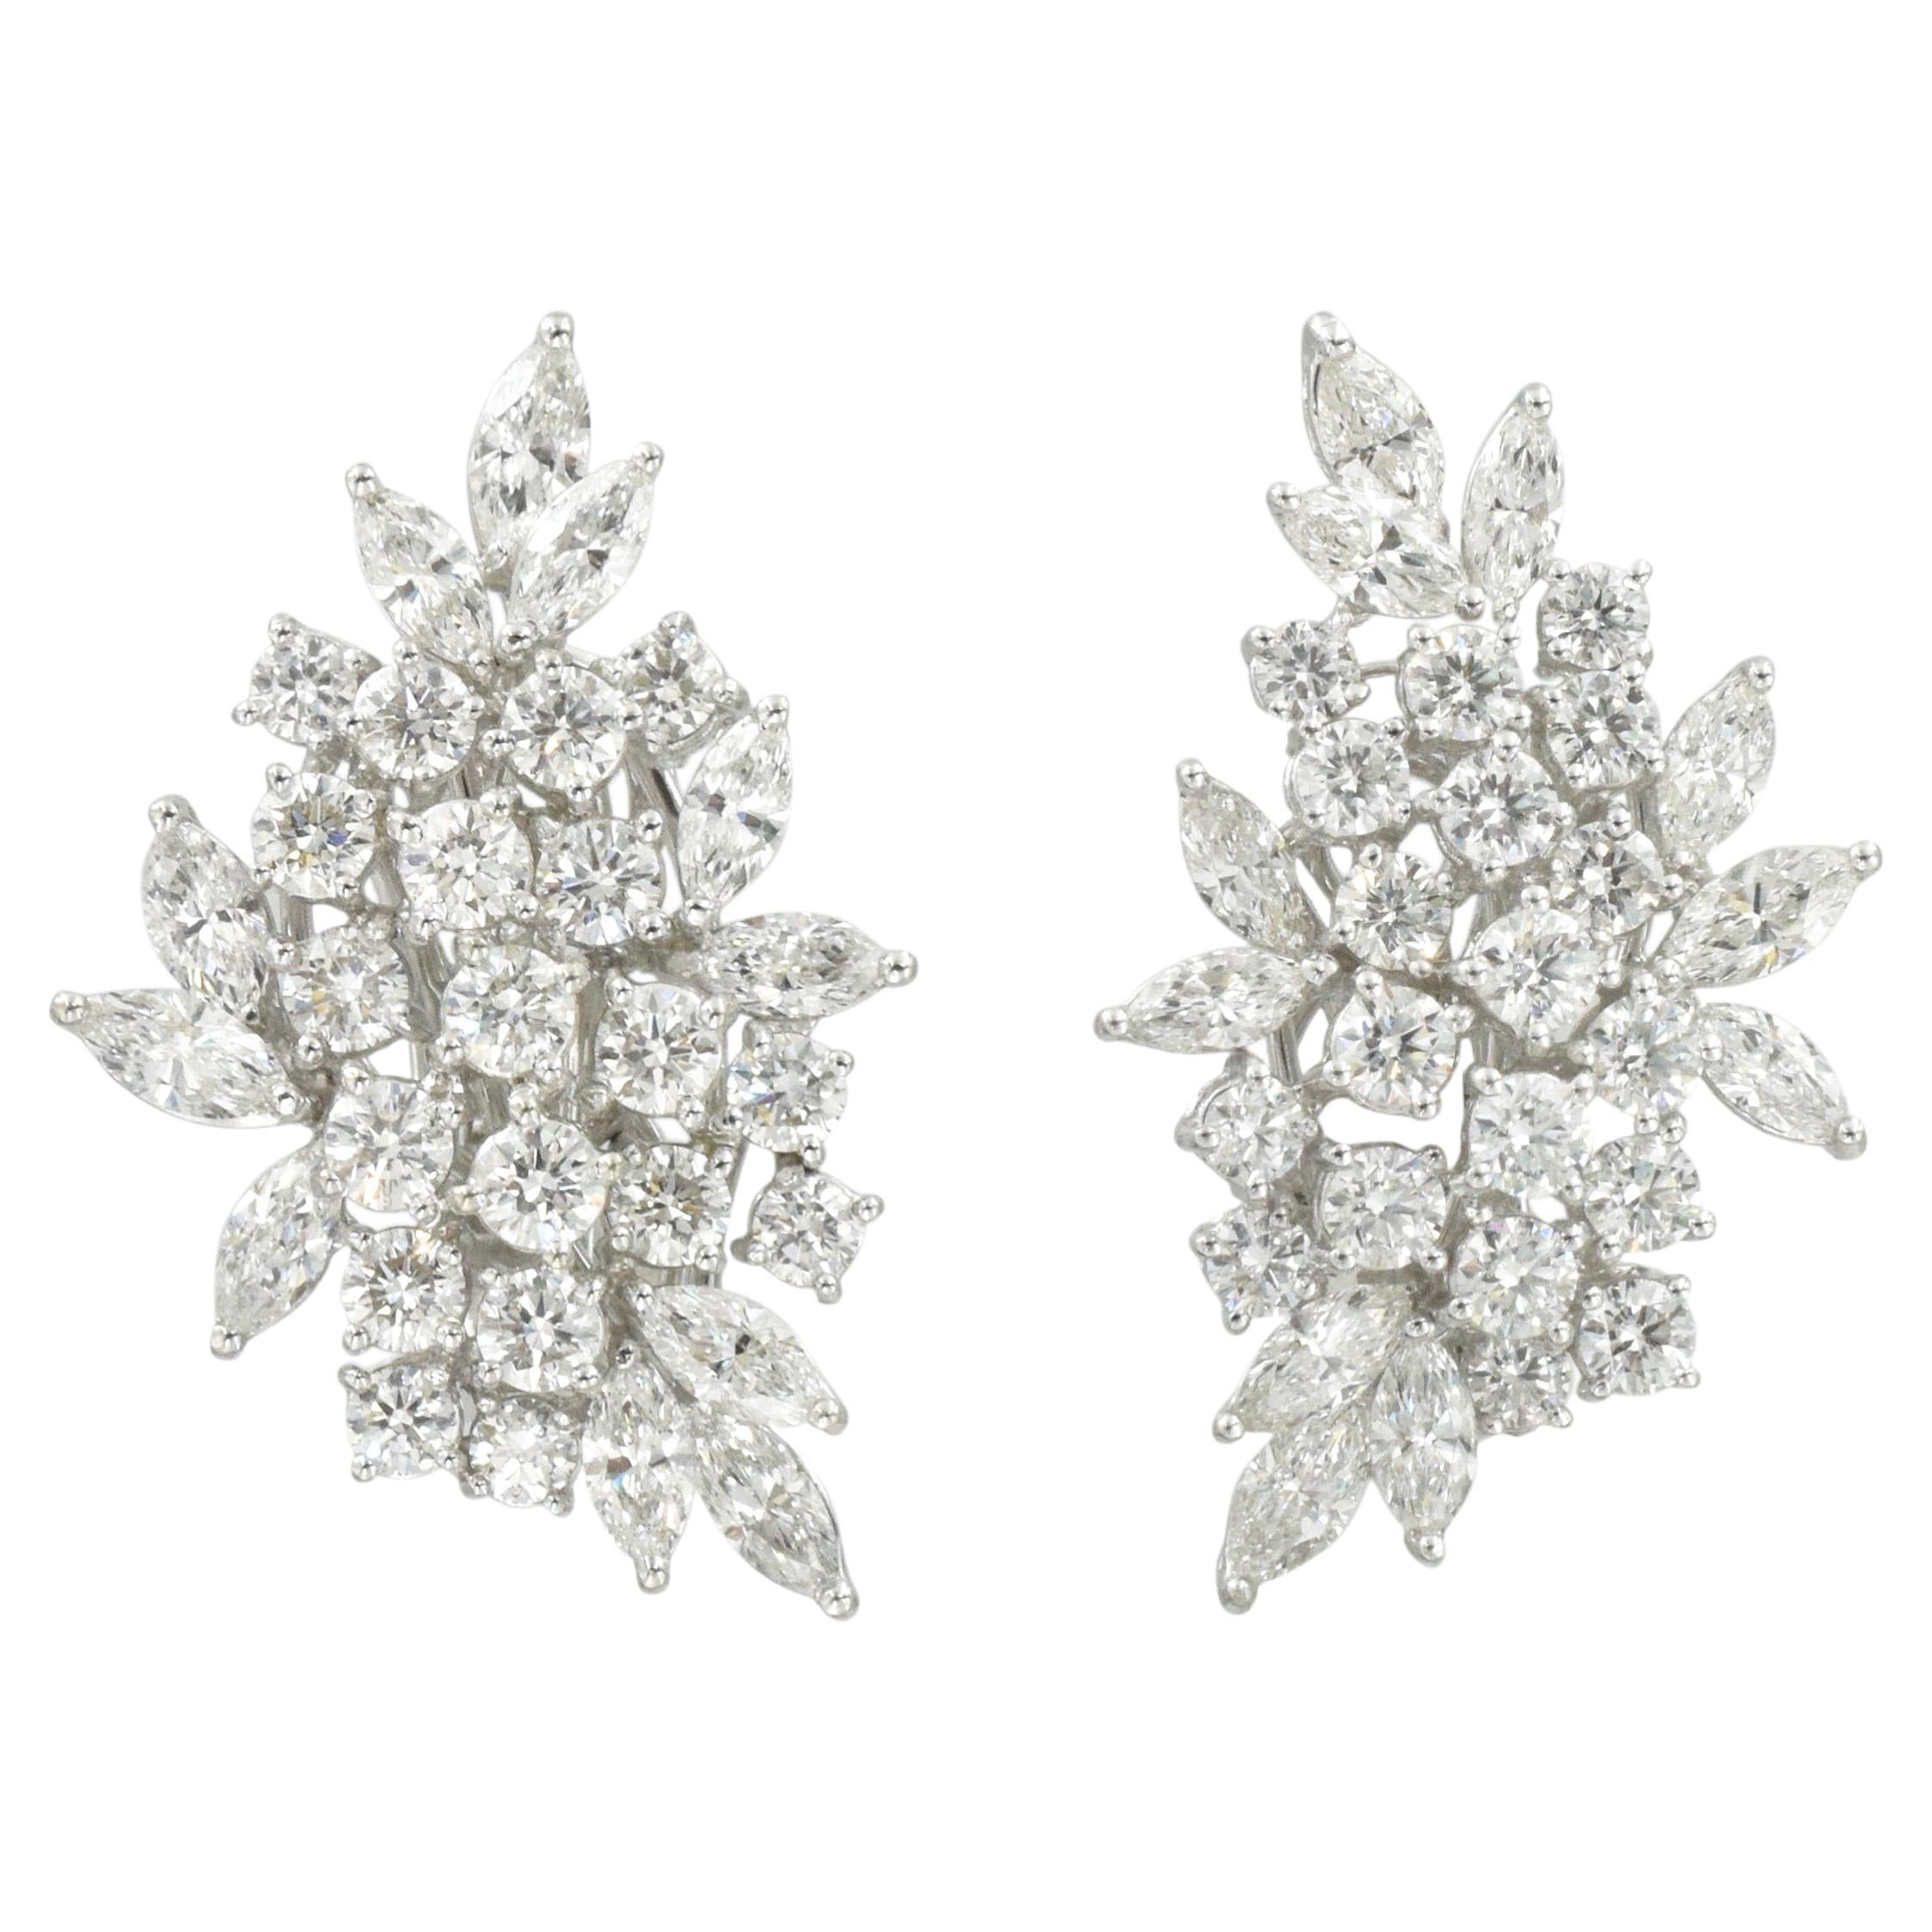 Chanel 'Double C' Rose Gold and Diamond Earrings at 1stDibs